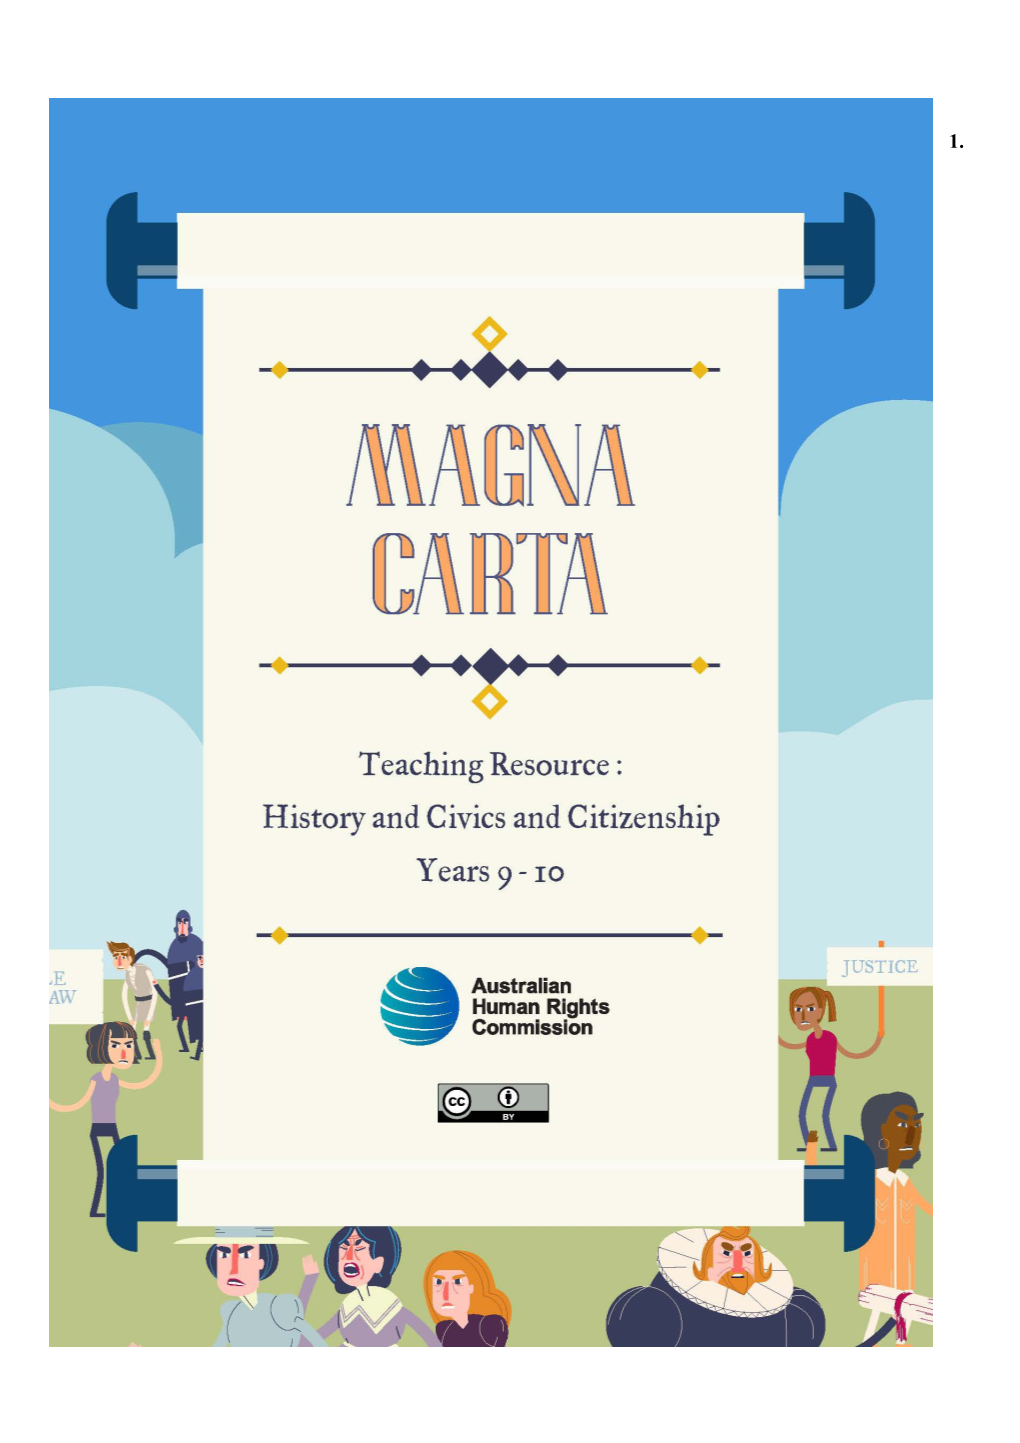 Magna Carta Has Had an Enduring Legacy That Has Shaped the Human Rights and Freedoms That